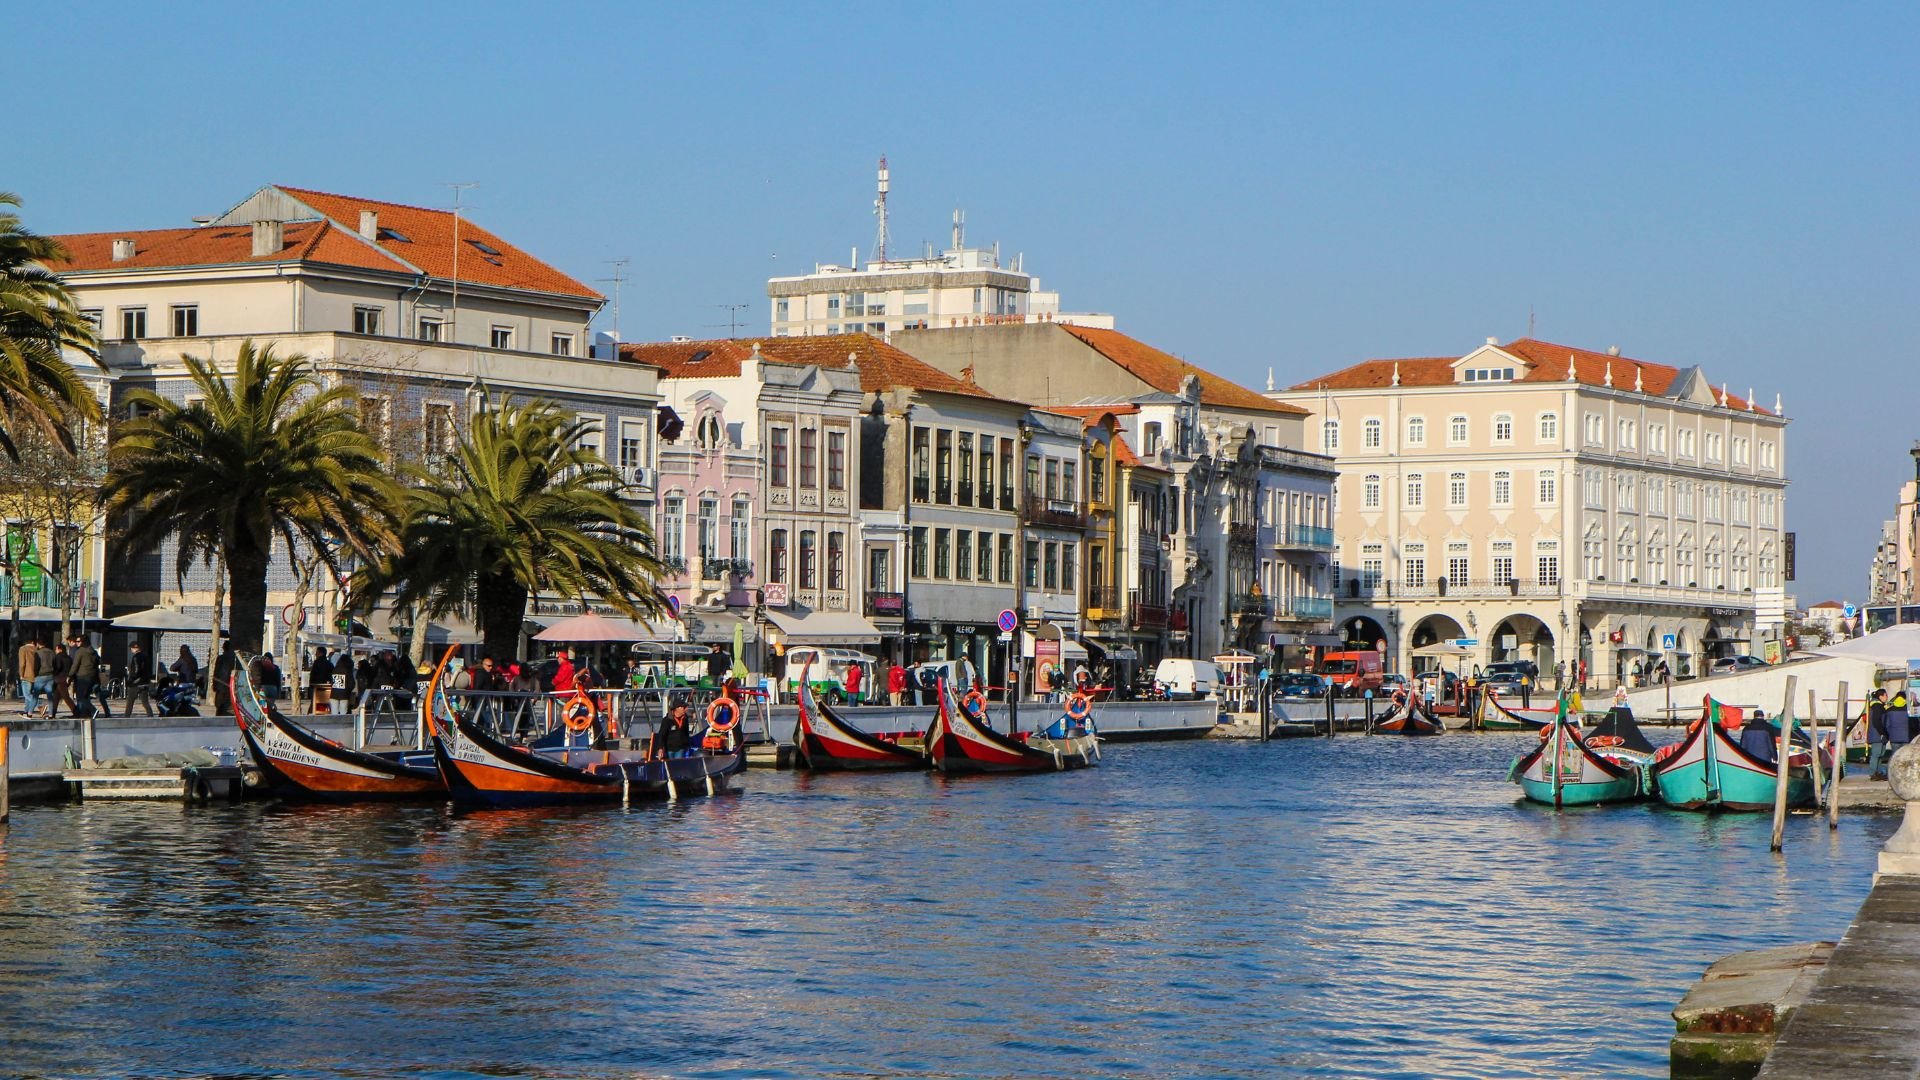 Image of Aveiro's Art Nouveau Route, featuring ornate Art Nouveau architecture and decorative details along the picturesque streets of Aveiro, Portugal